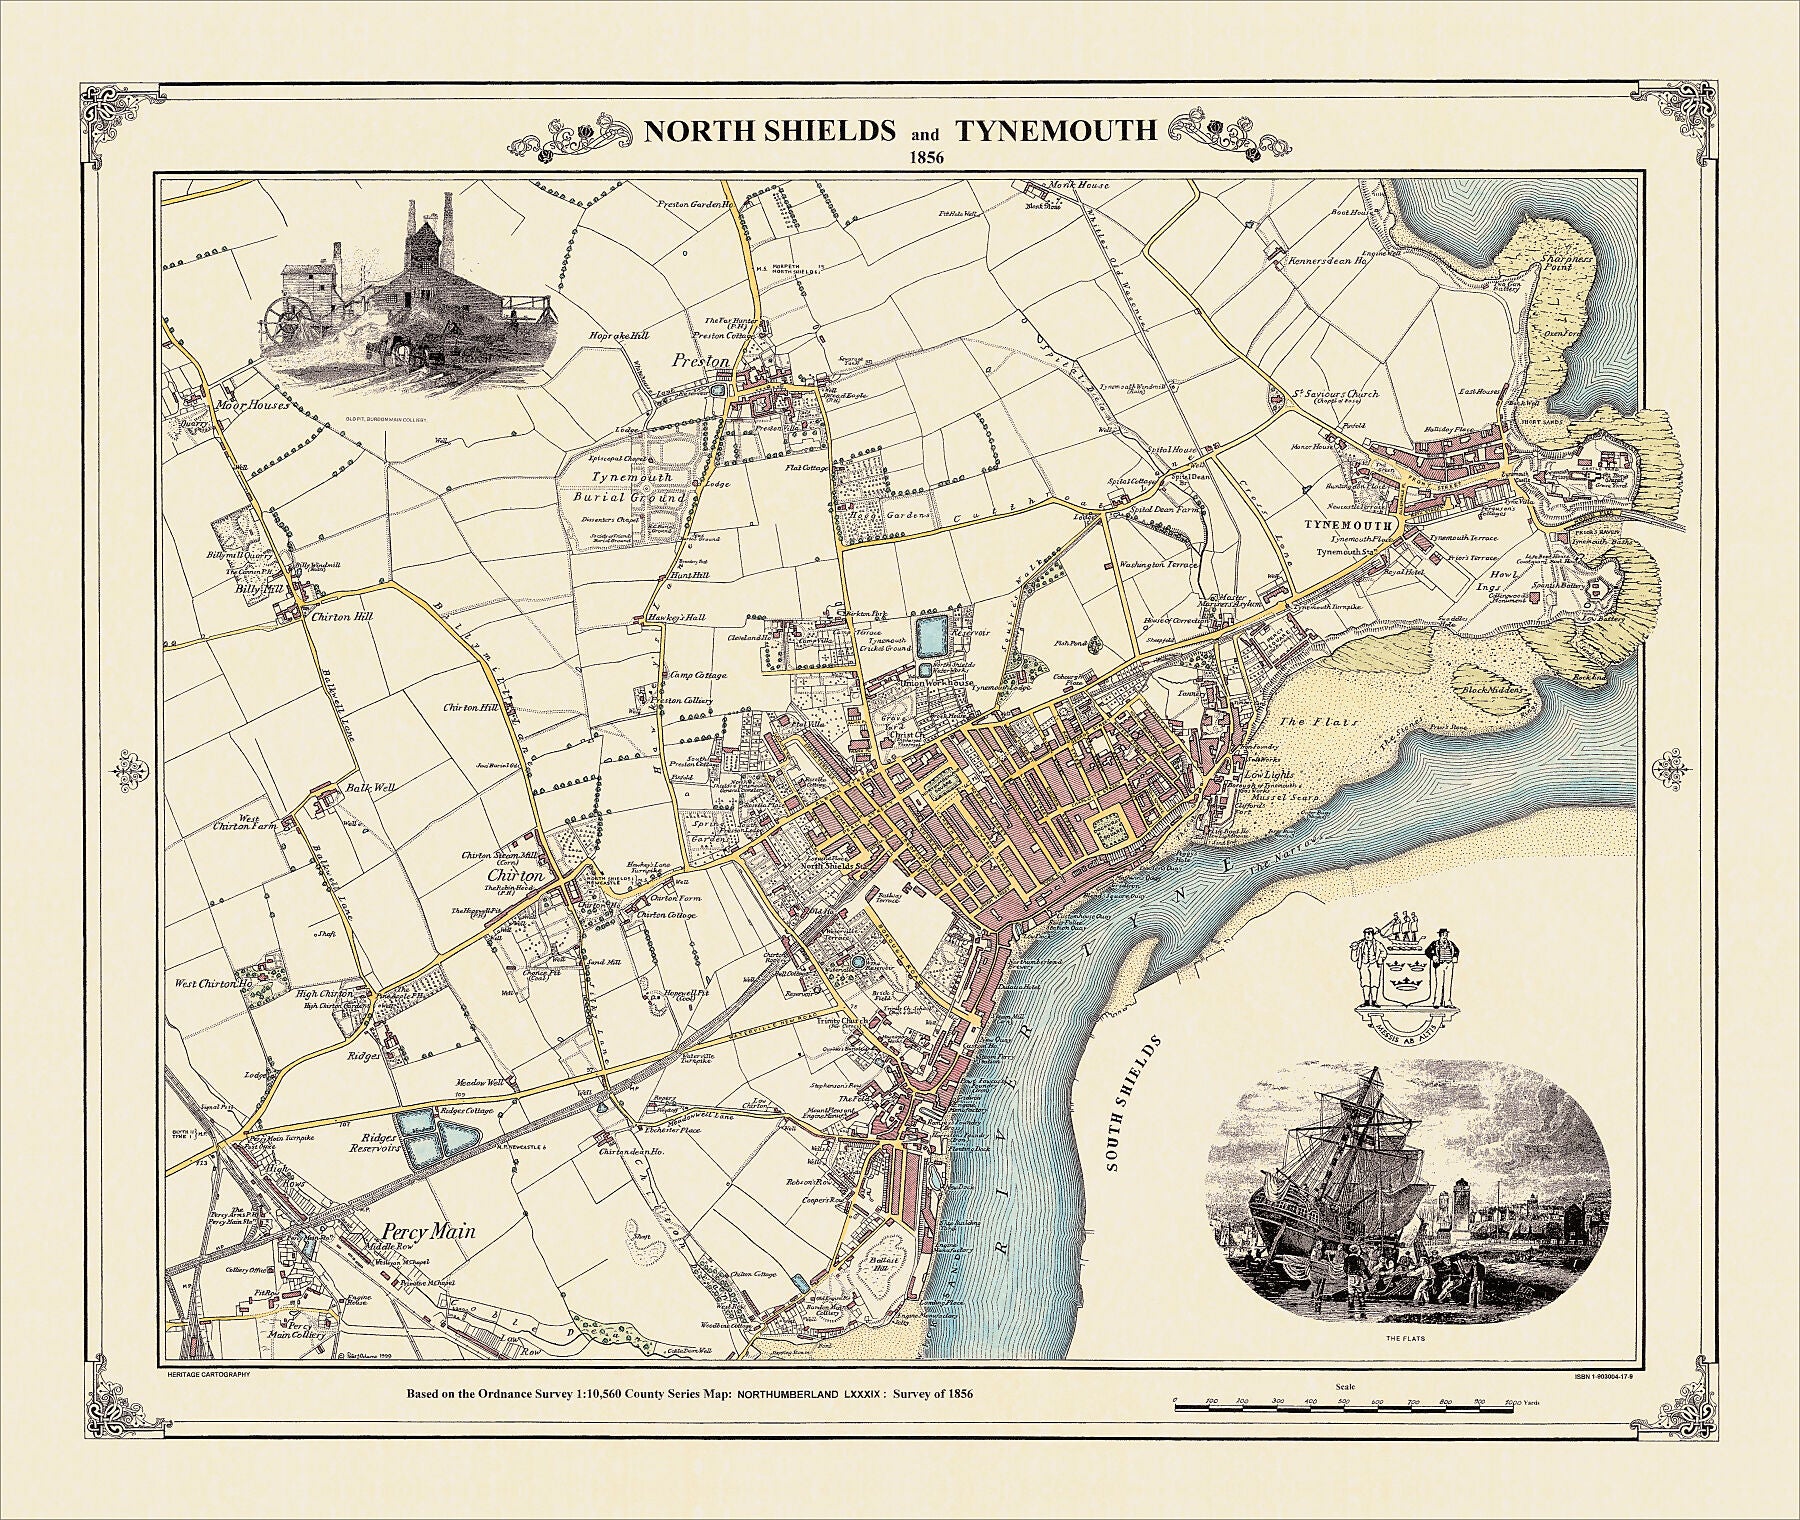 Coloured Victorian map of North Shields and Tynemouth in 1856 by Peter J Adams of Heritage Cartography